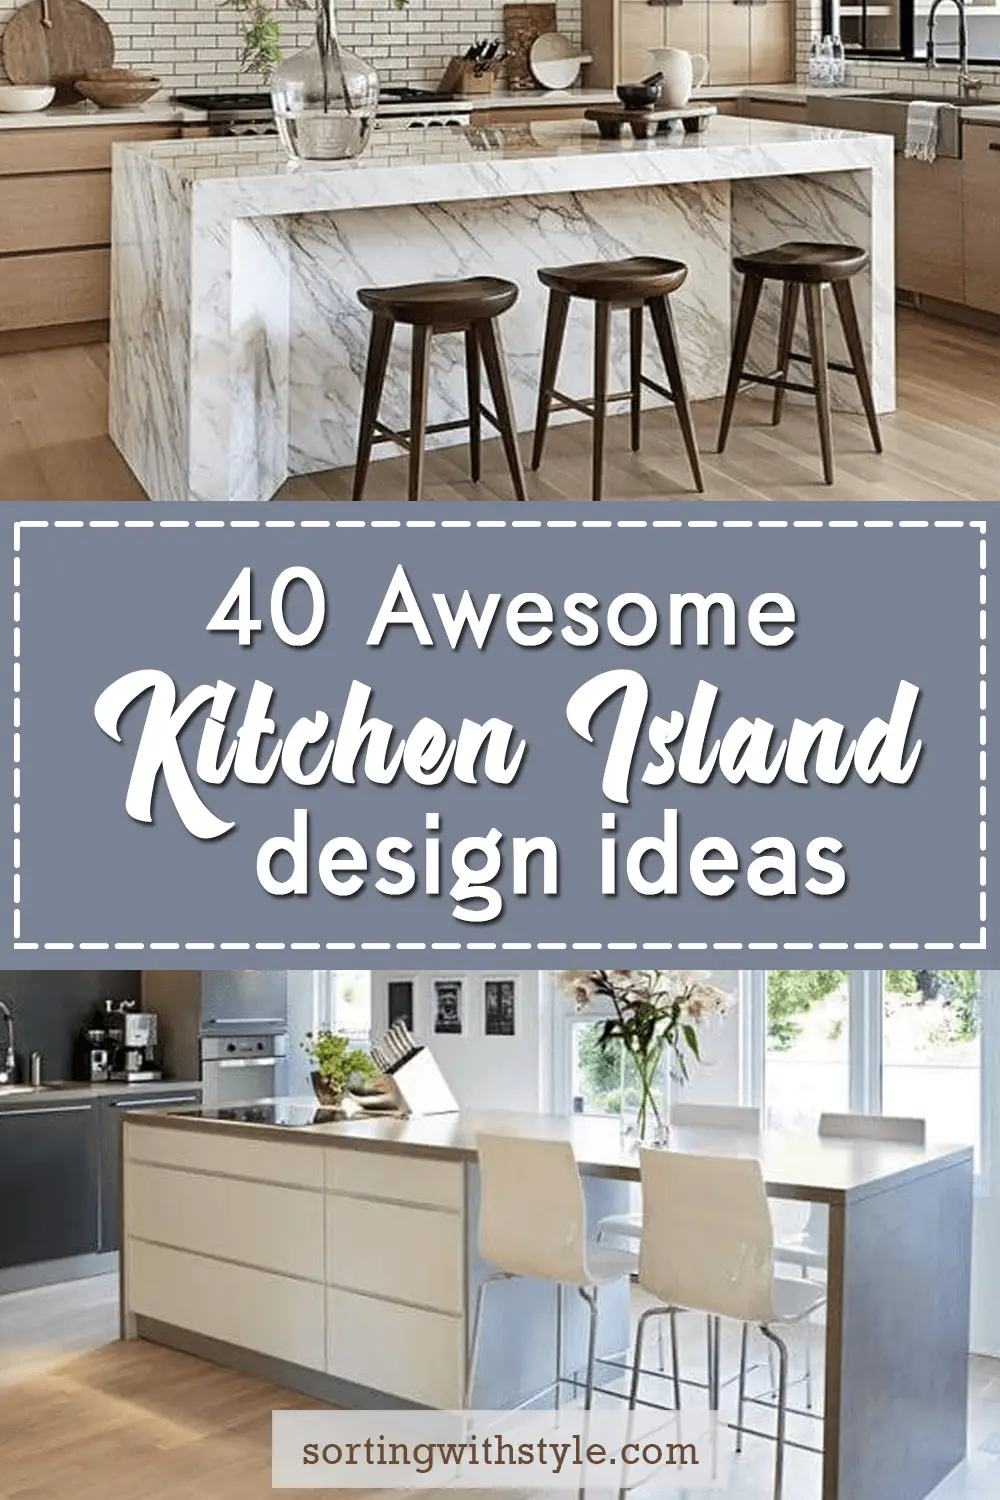 18 Awesome Kitchen Island Design Ideas with Modern Decor & Layout